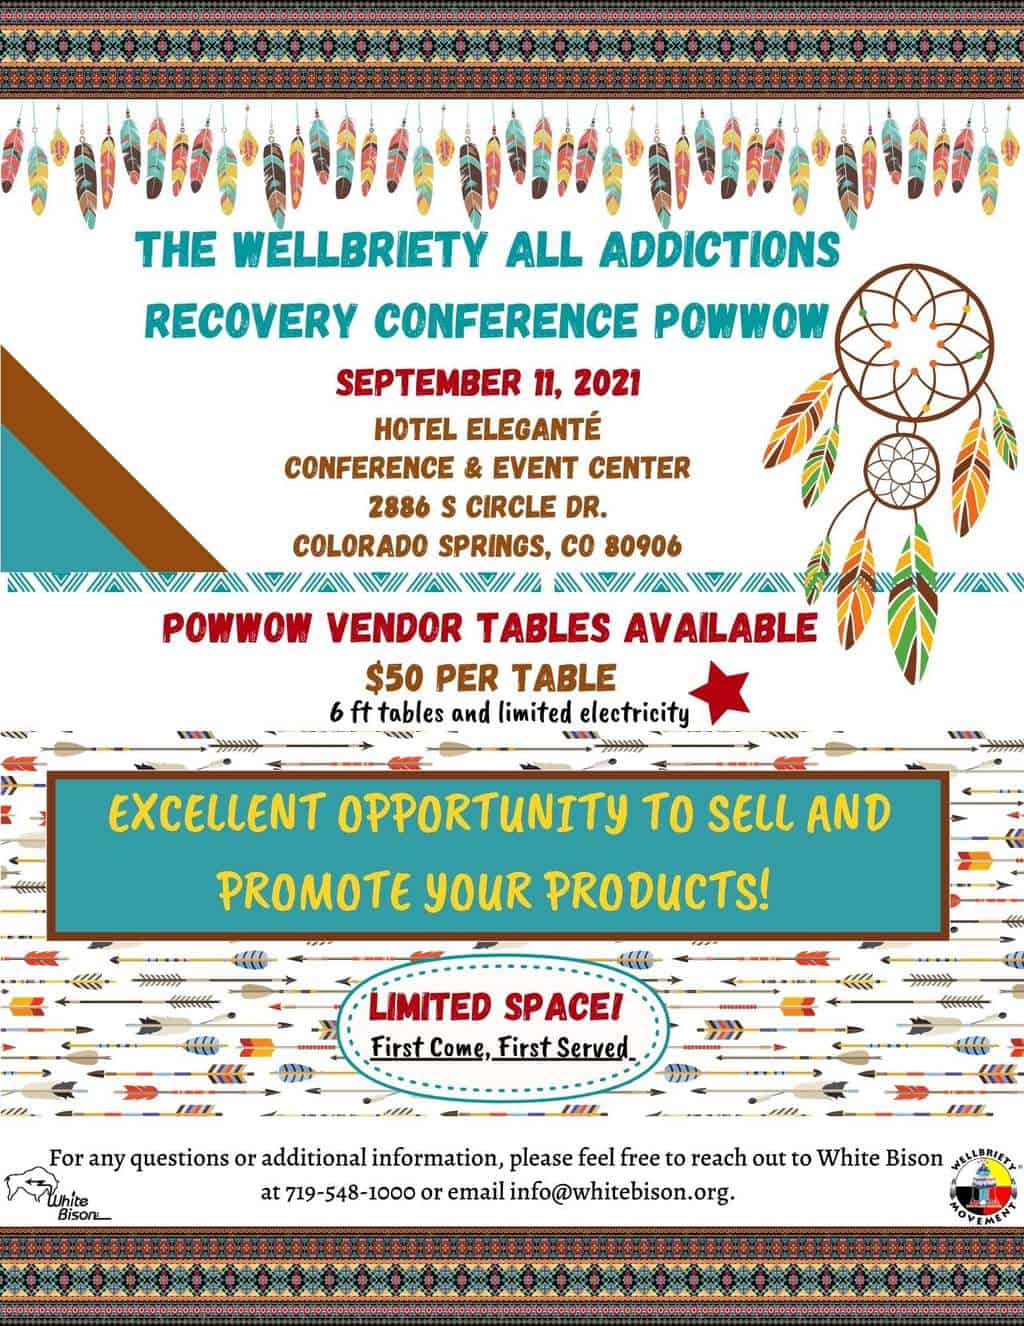 The Wellbriety All Addictions Recovery Conference Powwow